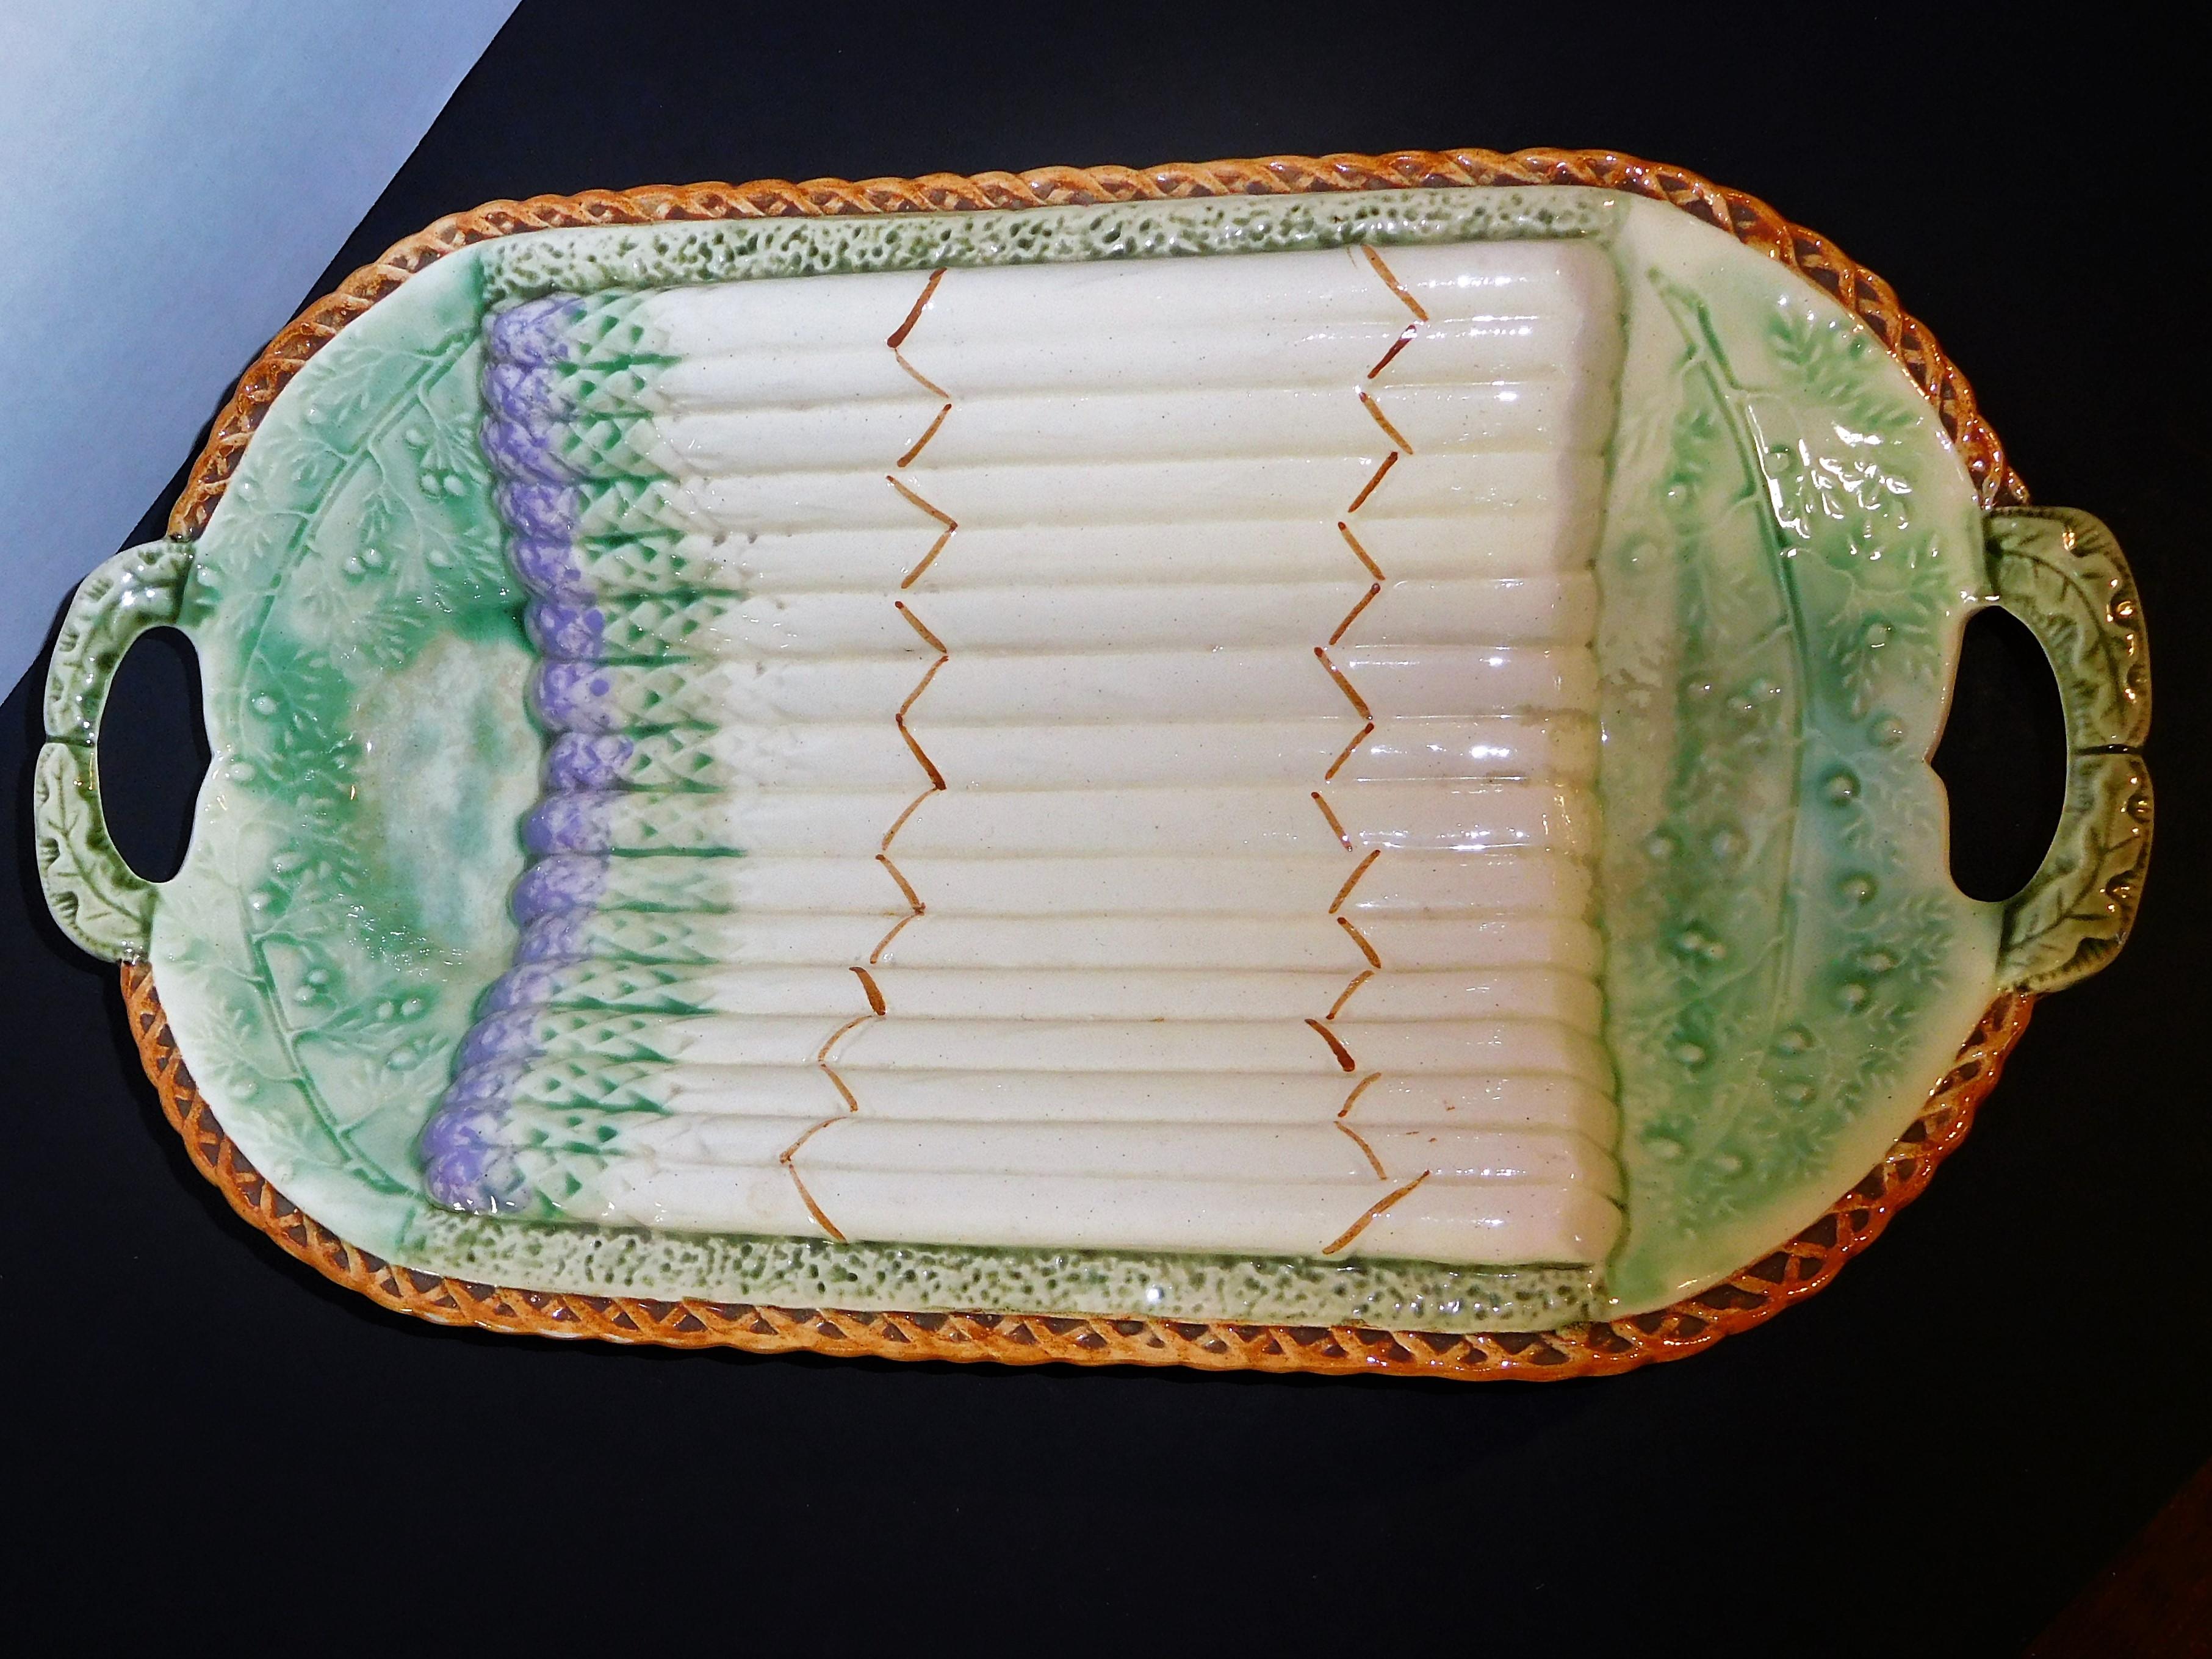 Hand-Painted English Majolica Asparagus Cradle, Aesthetic Movement Influence, circa 1885 For Sale